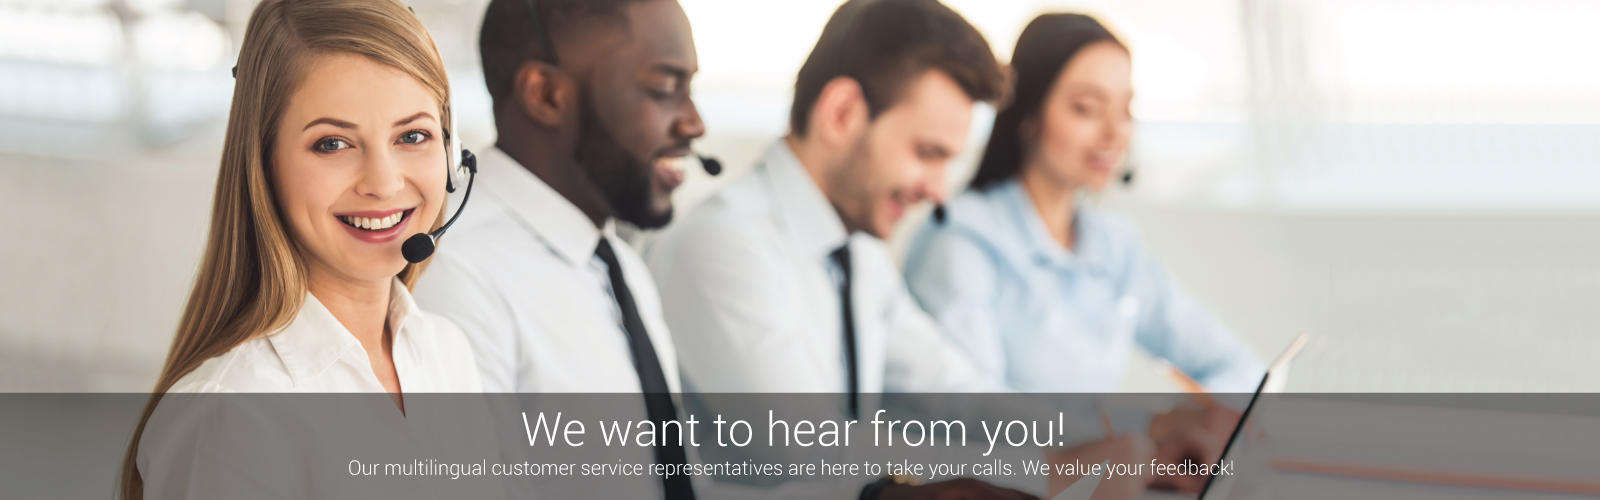 We want to hear from you!Our multilingual customer service representatives are here to take your call 24 hours a day, 7 days a week.We value your feedback!